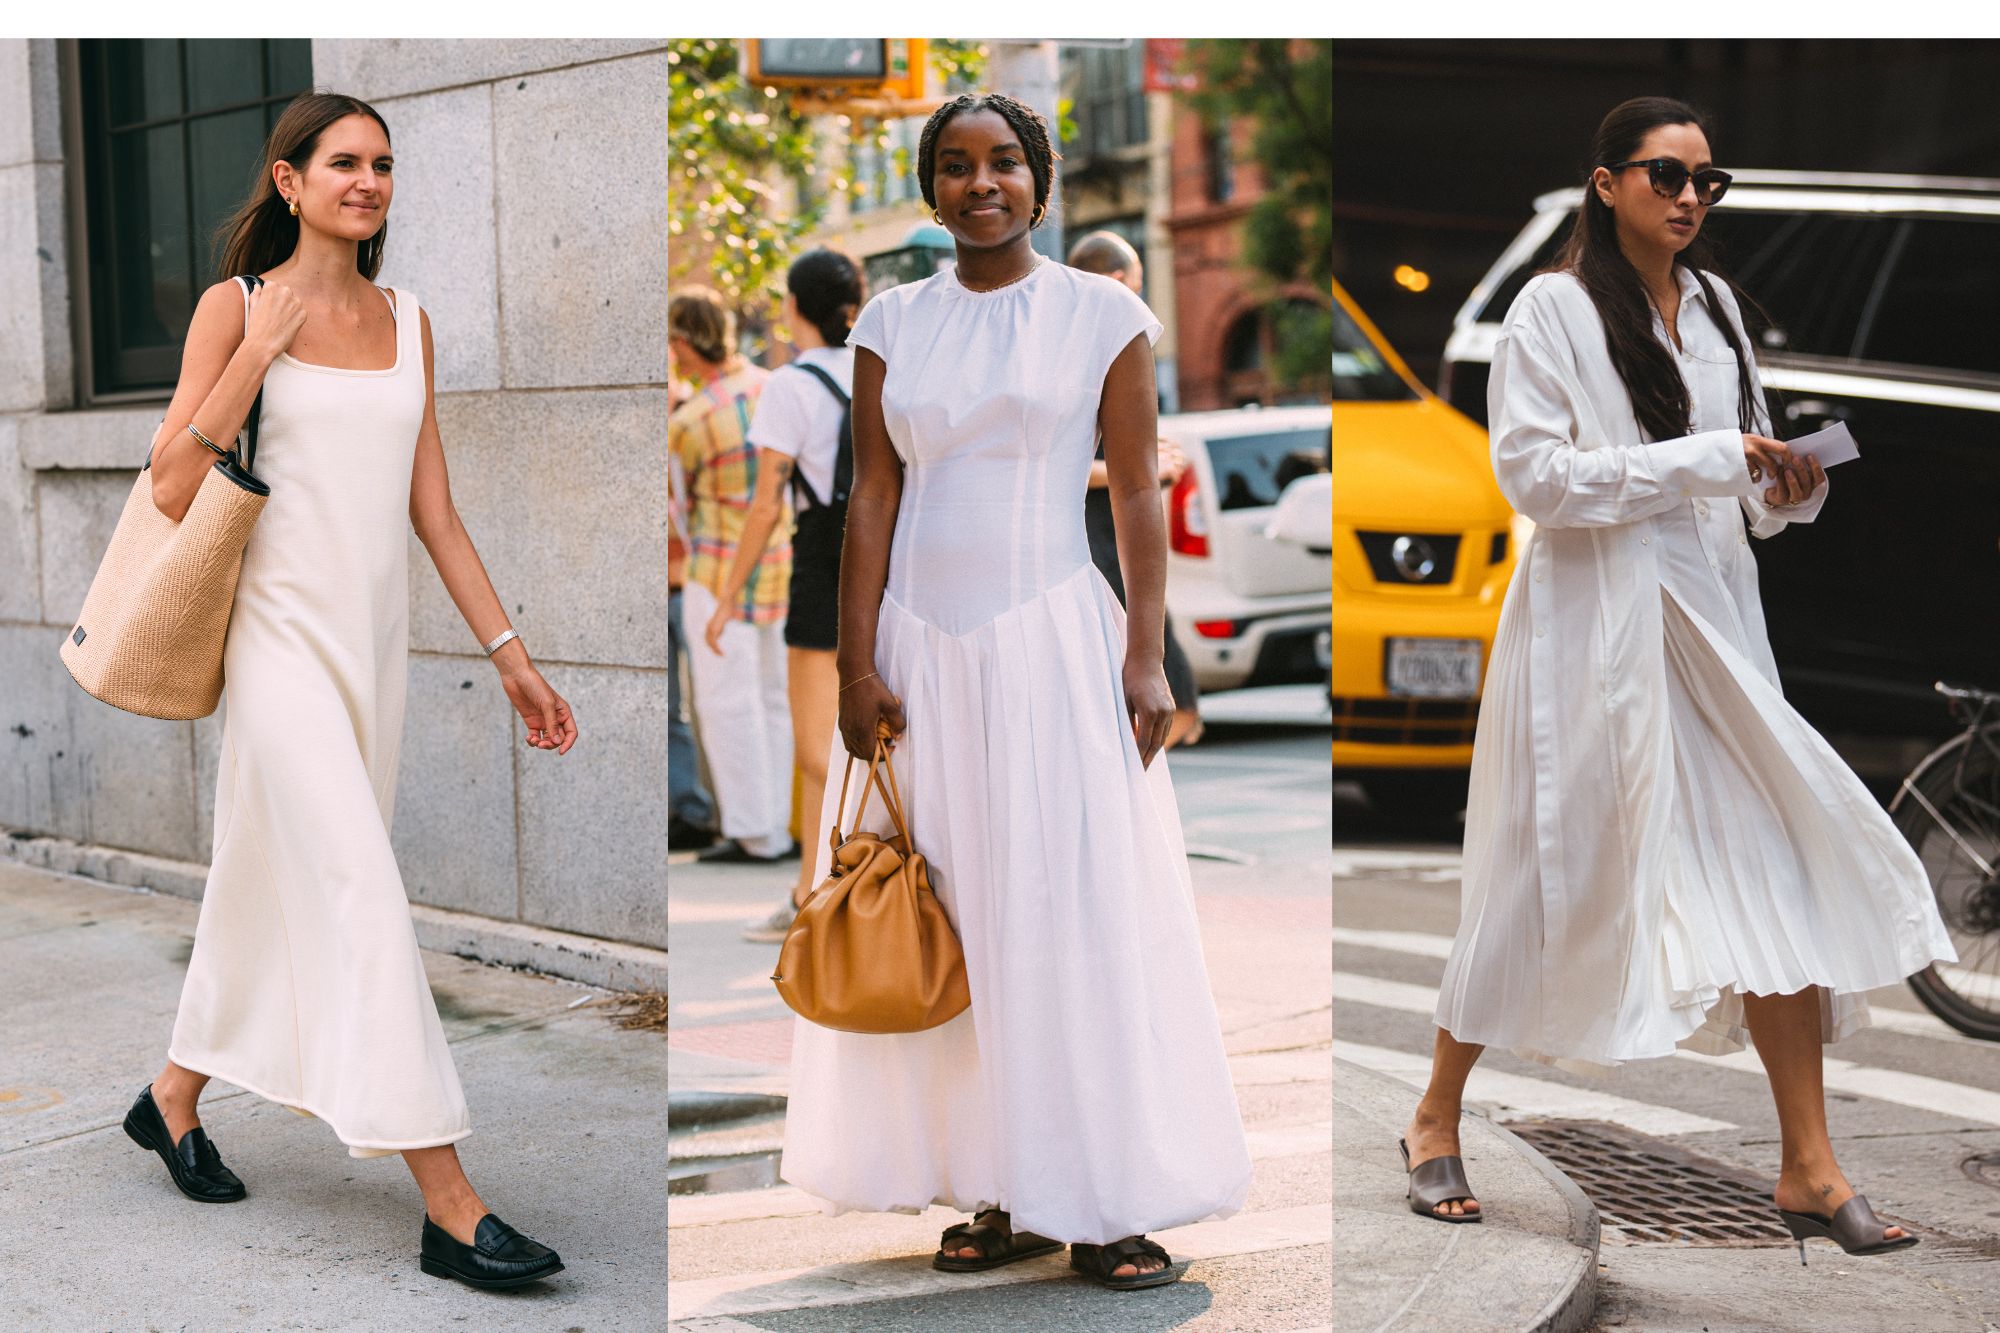 The way you wear itlittle white dresses